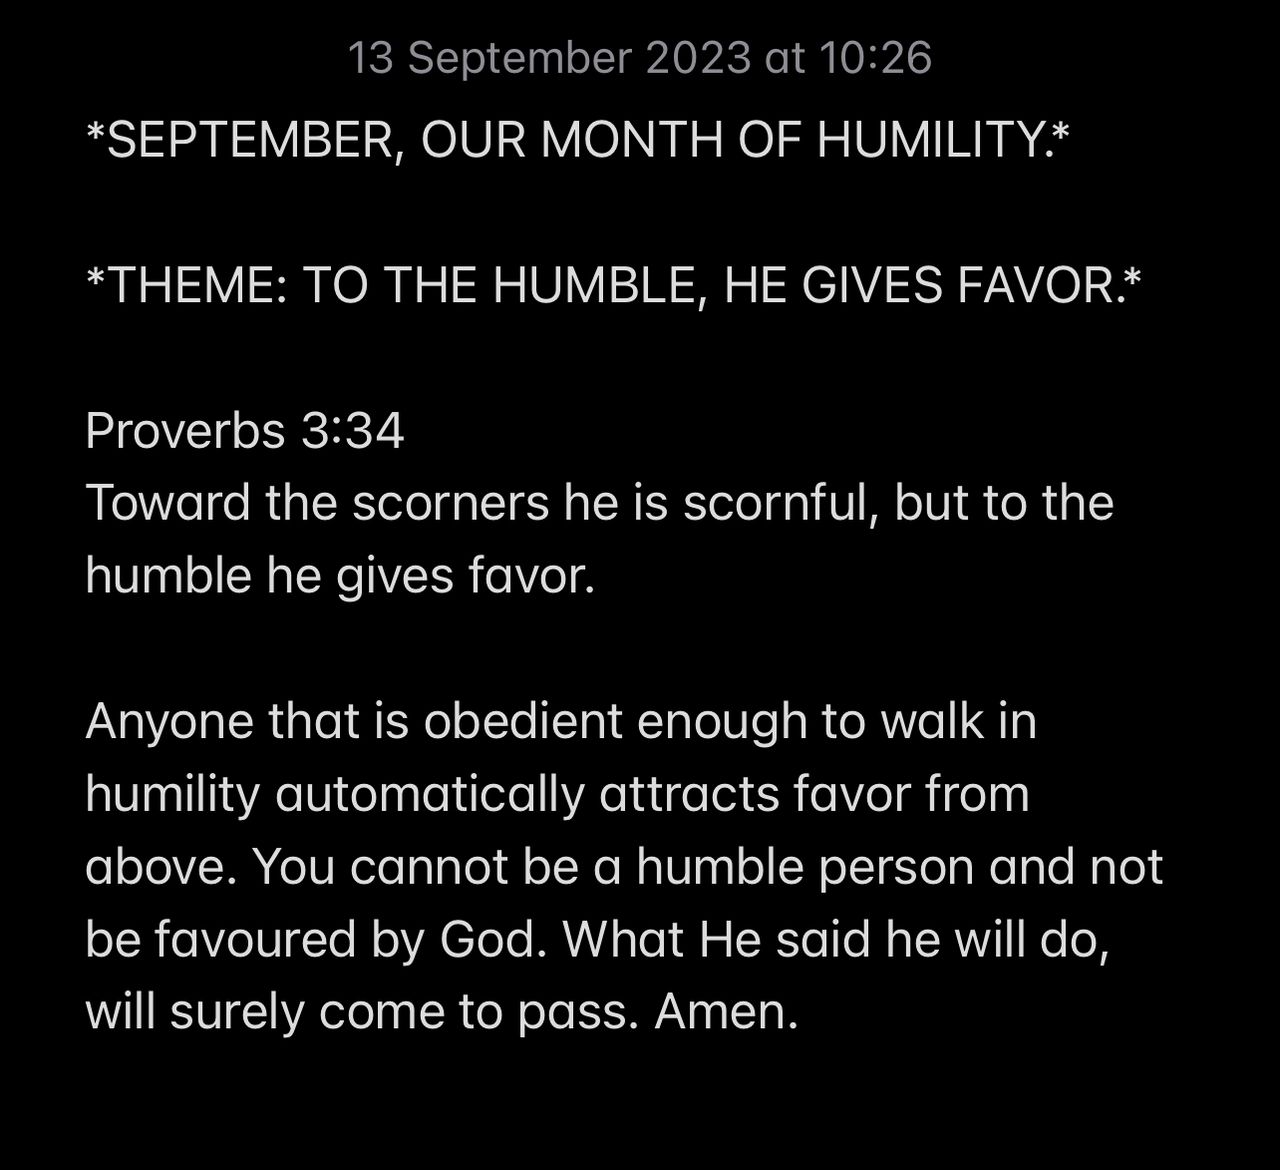 TO THE HUMBLE, HE GIVES FAVOR.